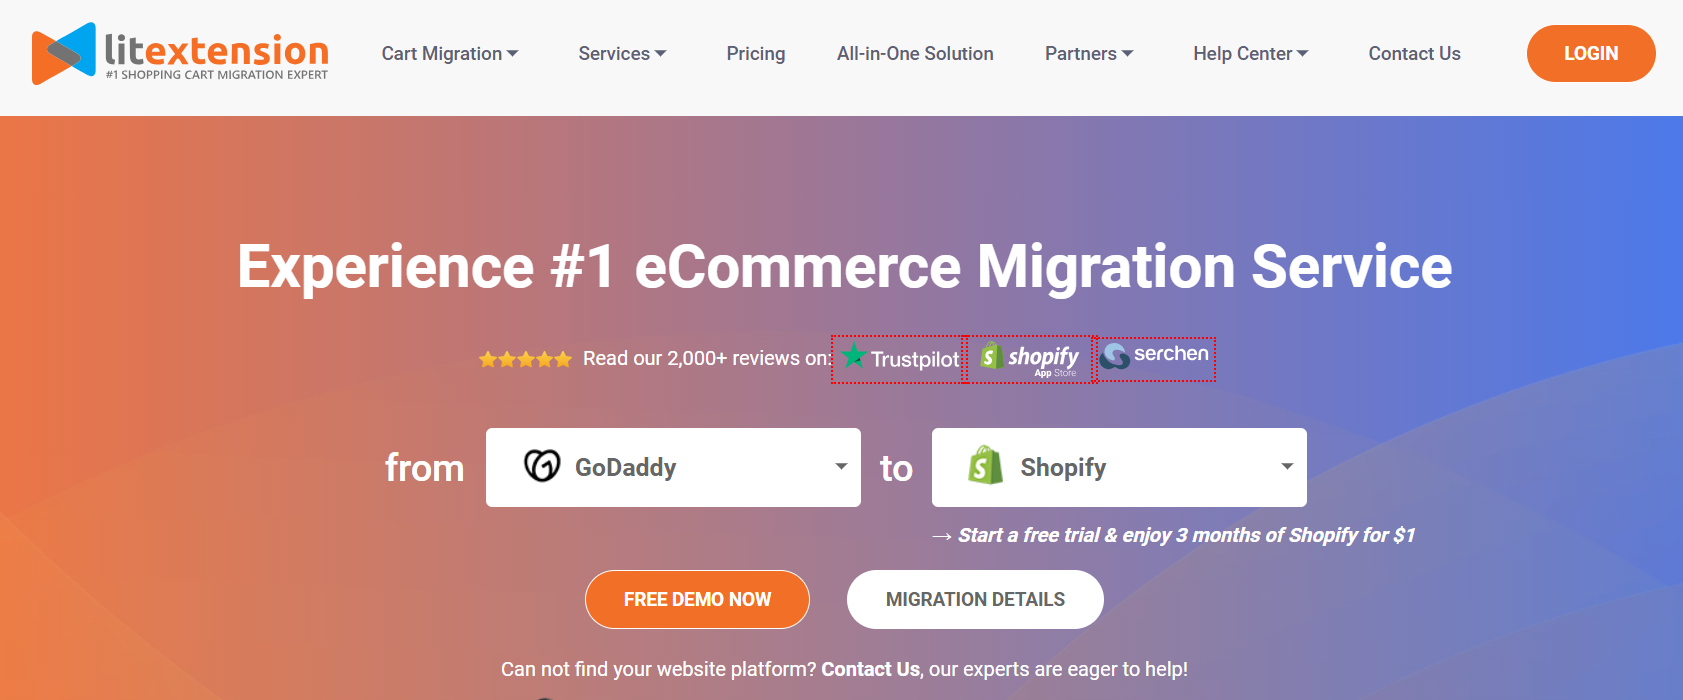 Migrate from GoDaddy to Shopify with LitExtension